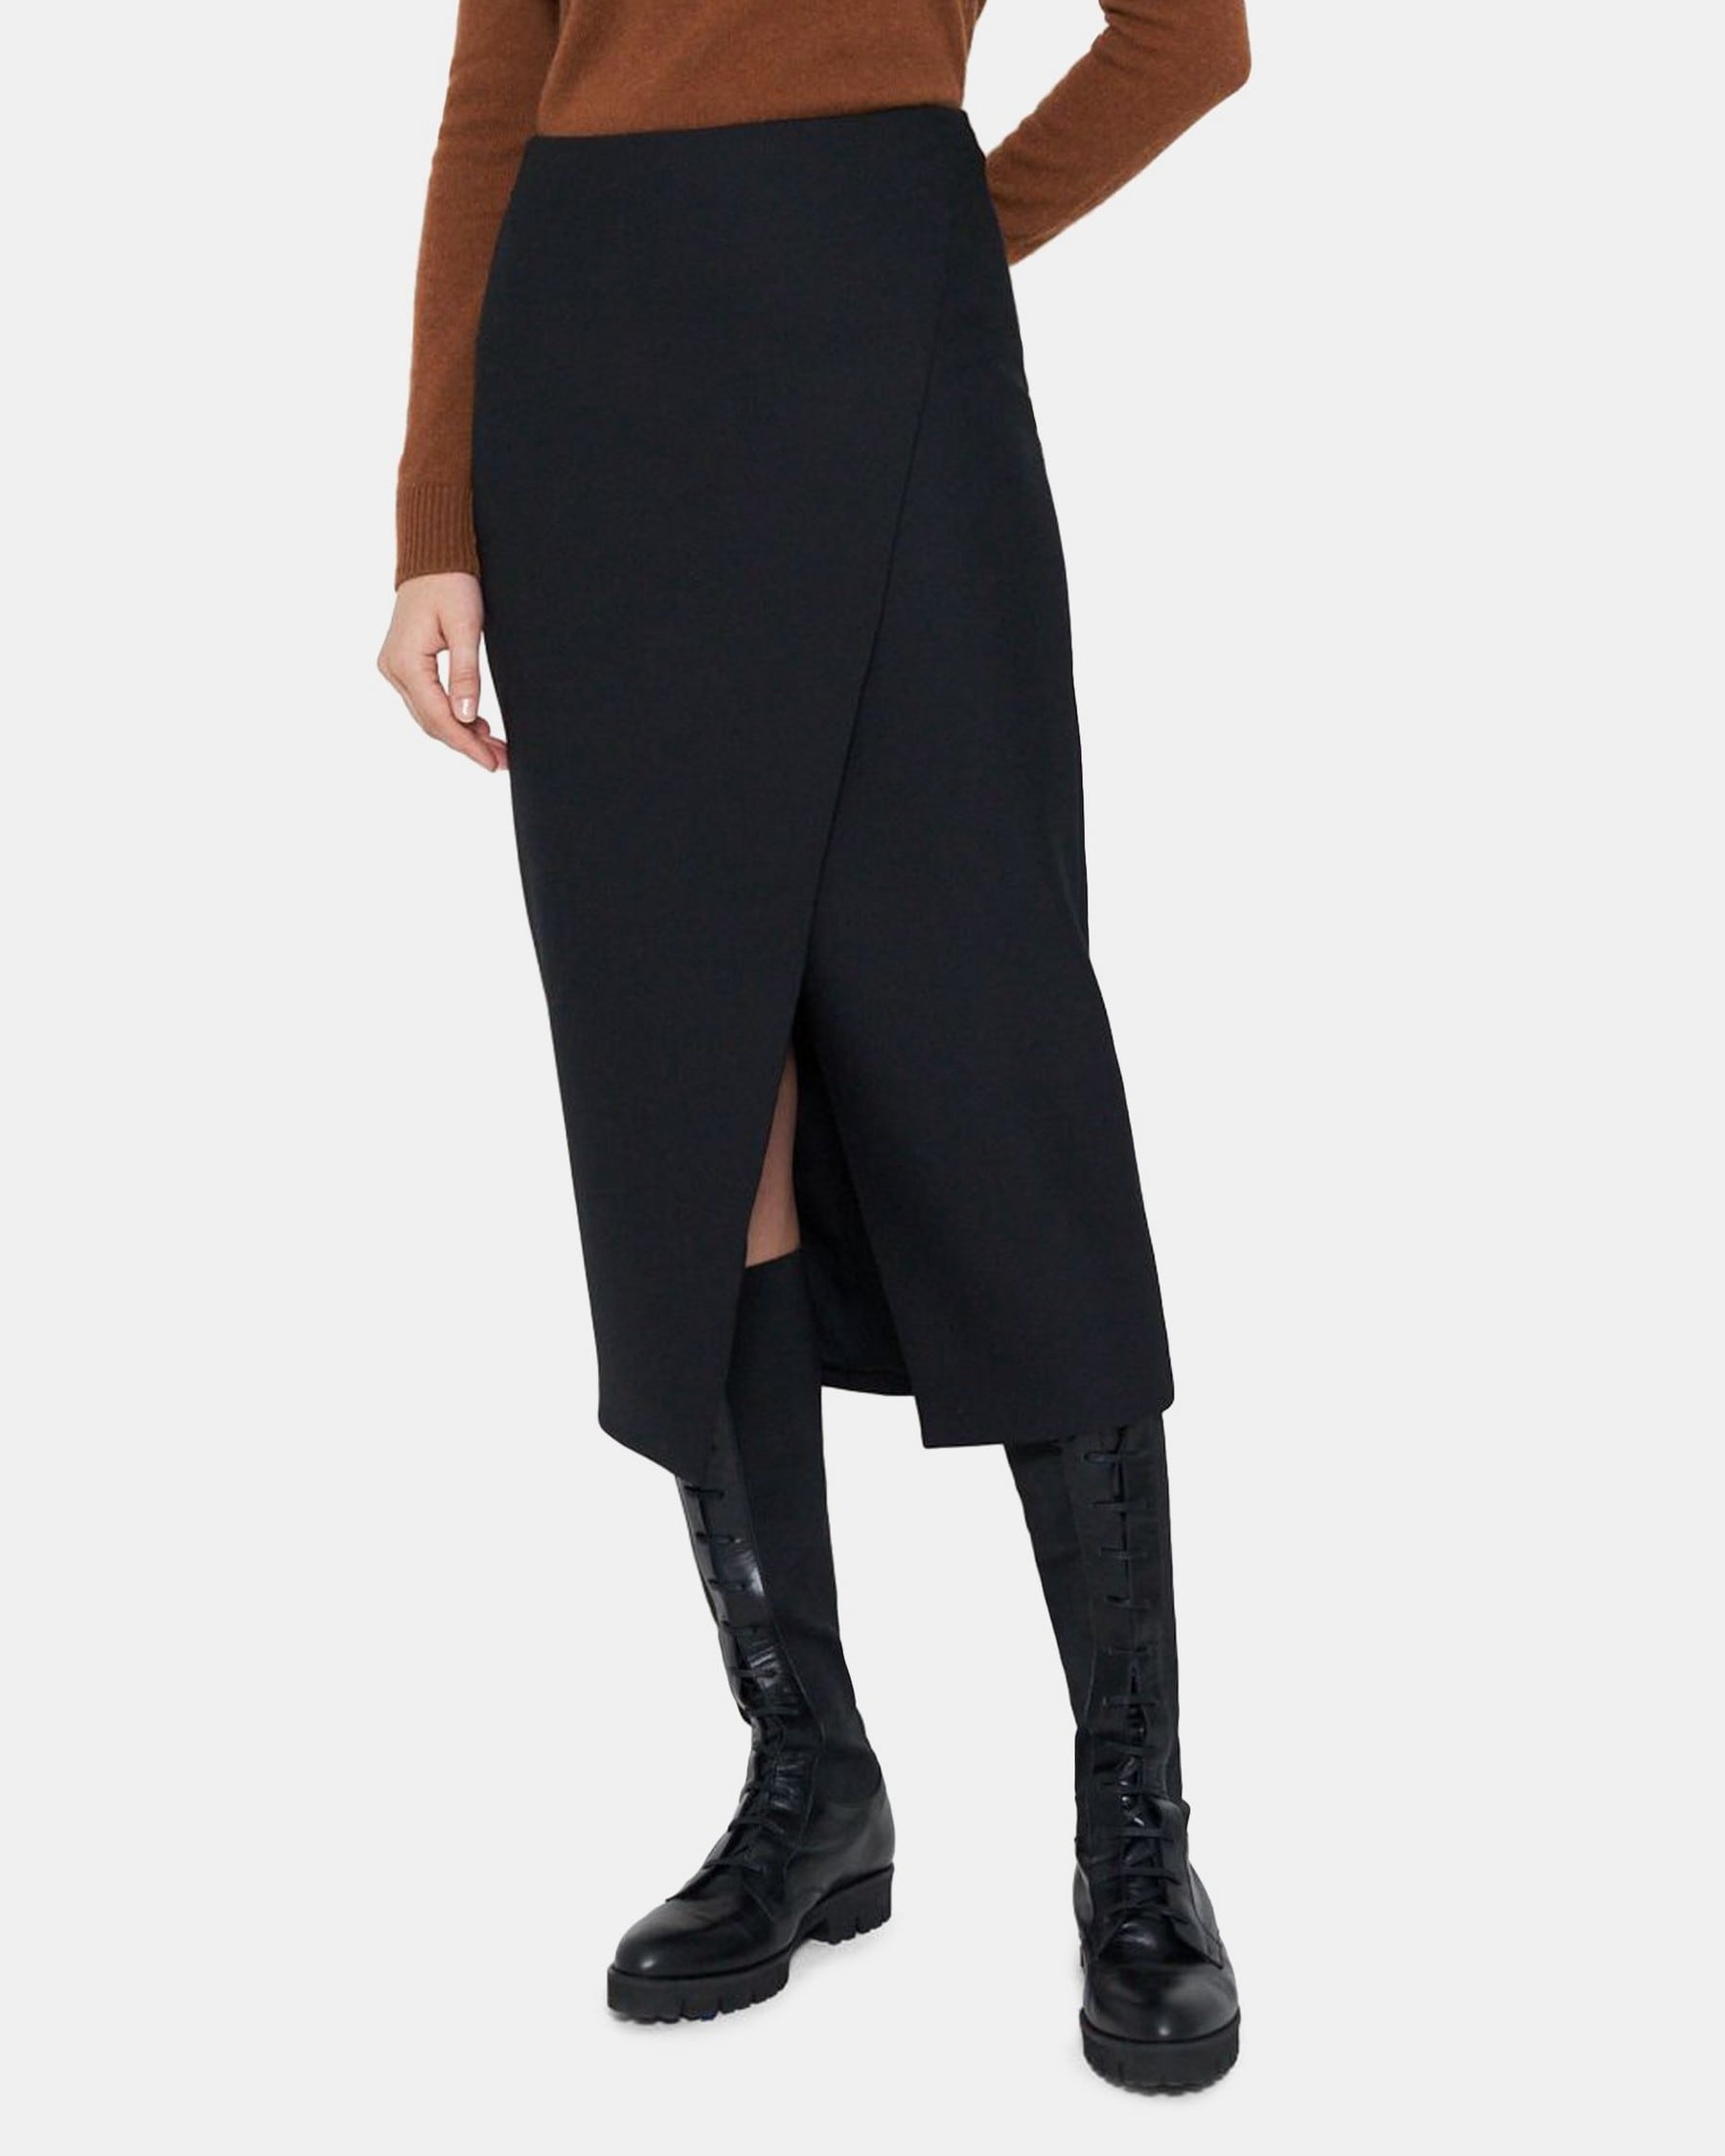 Tapered Midi Skirt in Stretch Wool Blend